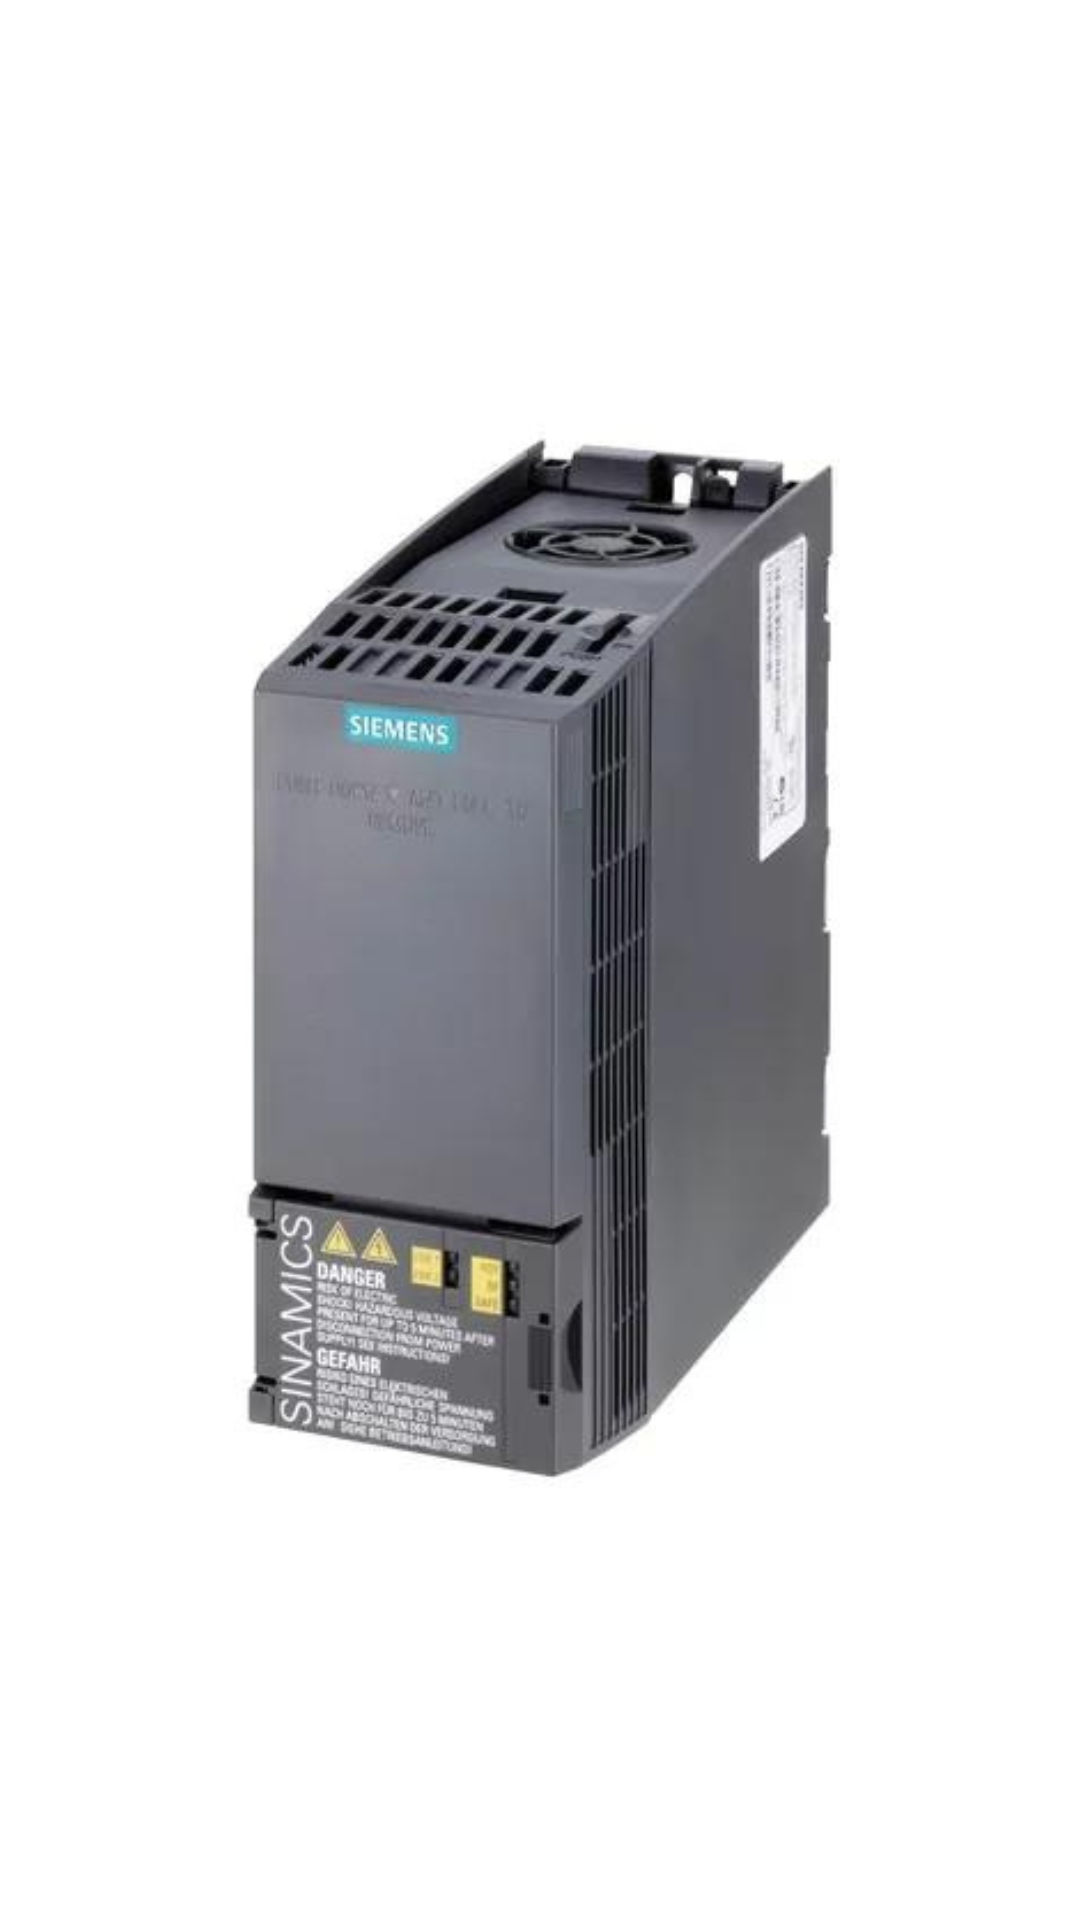 6SL3210-1KE14-3UF2 Siemens SINAMICS G120C RATED POWER 1,5KW WITH 150% OVERLOAD FOR 3 SEC 3AC380-480V +10/-20% 47-63HZ UNFILTERED I/O-INTERFACE: 6DI, 2DO,1AI,1AO SAFE TORQUE OFF INTEGRATED FIELDBUS: PROFINET-PN PROTECTION: IP20